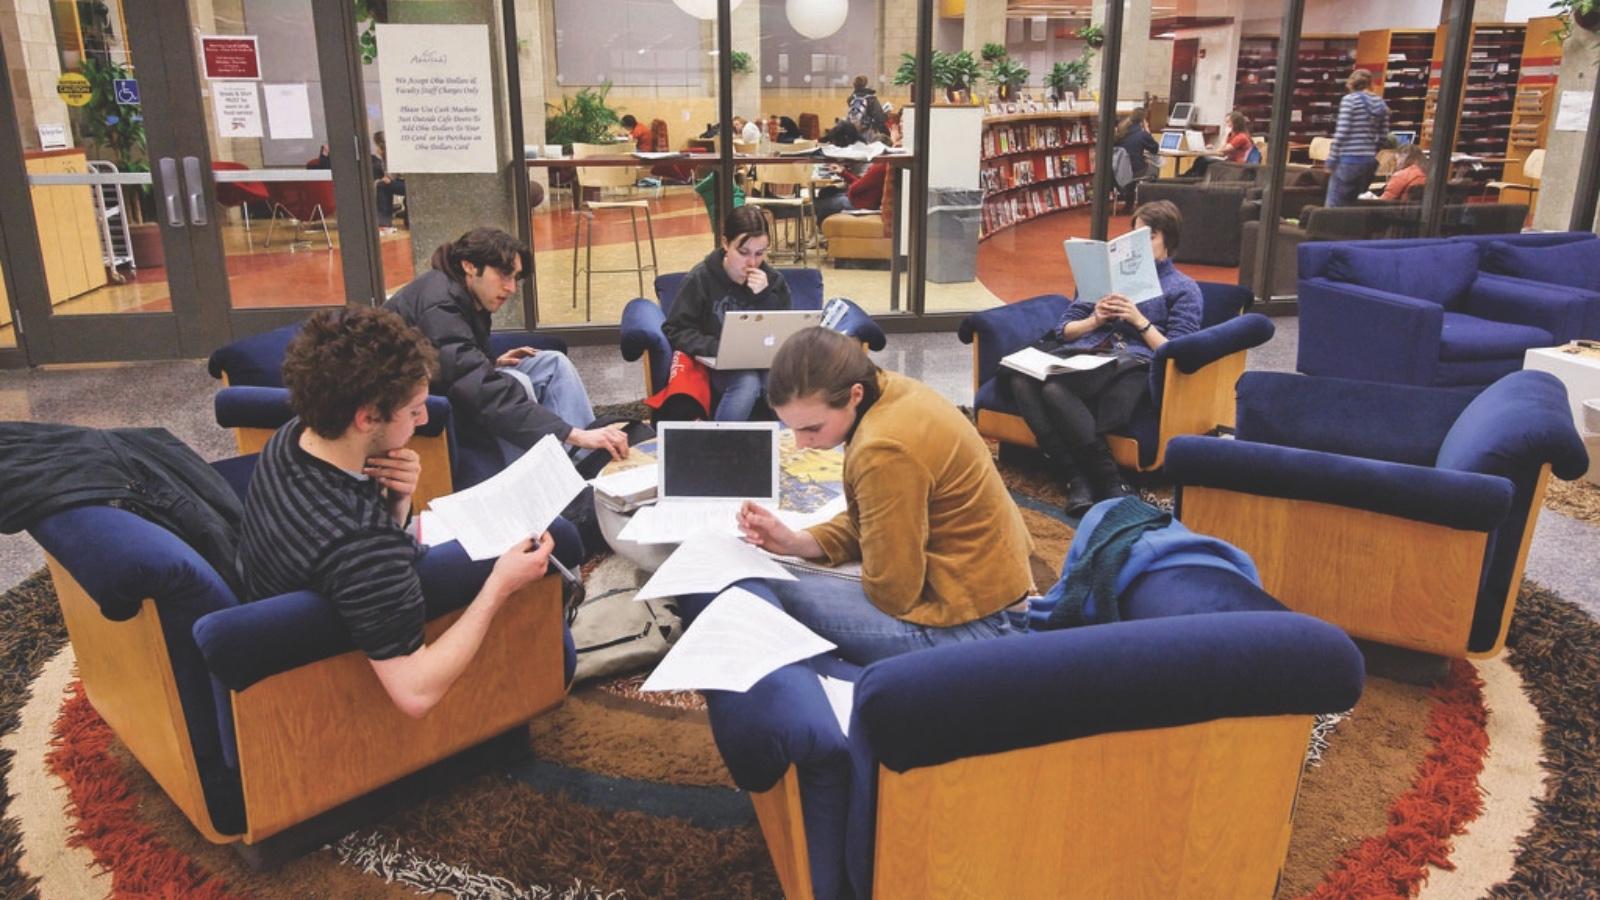 Students studying in Academic Commons in the main library.